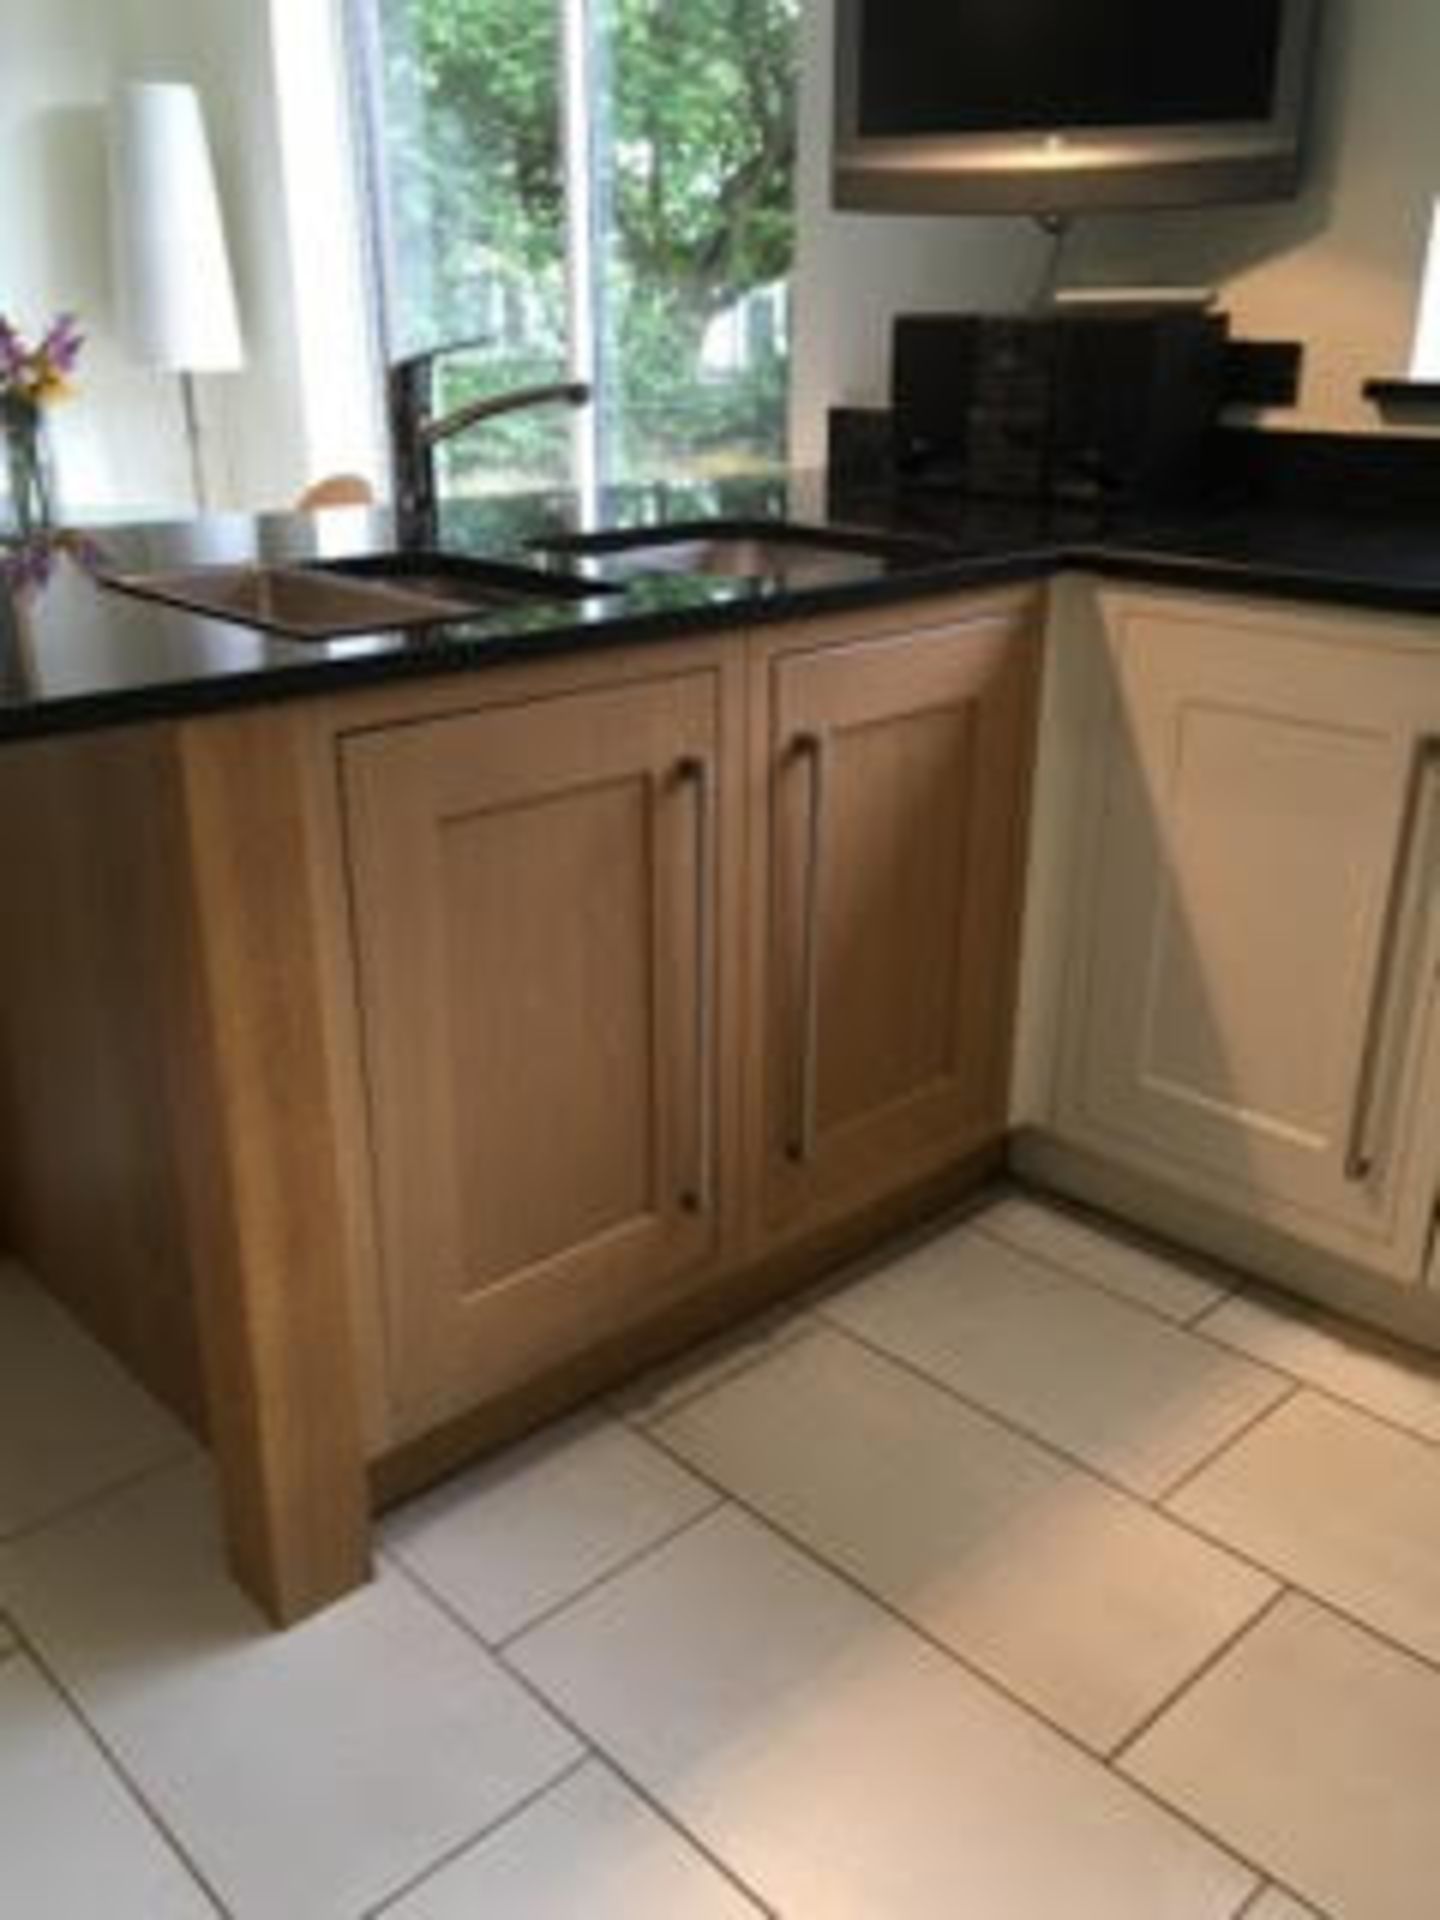 1 x Bespoke Solid Wood Fitted Kitchen With Granite Worktops - Pre-owned In Good Condtion - CL172 - - Image 9 of 22